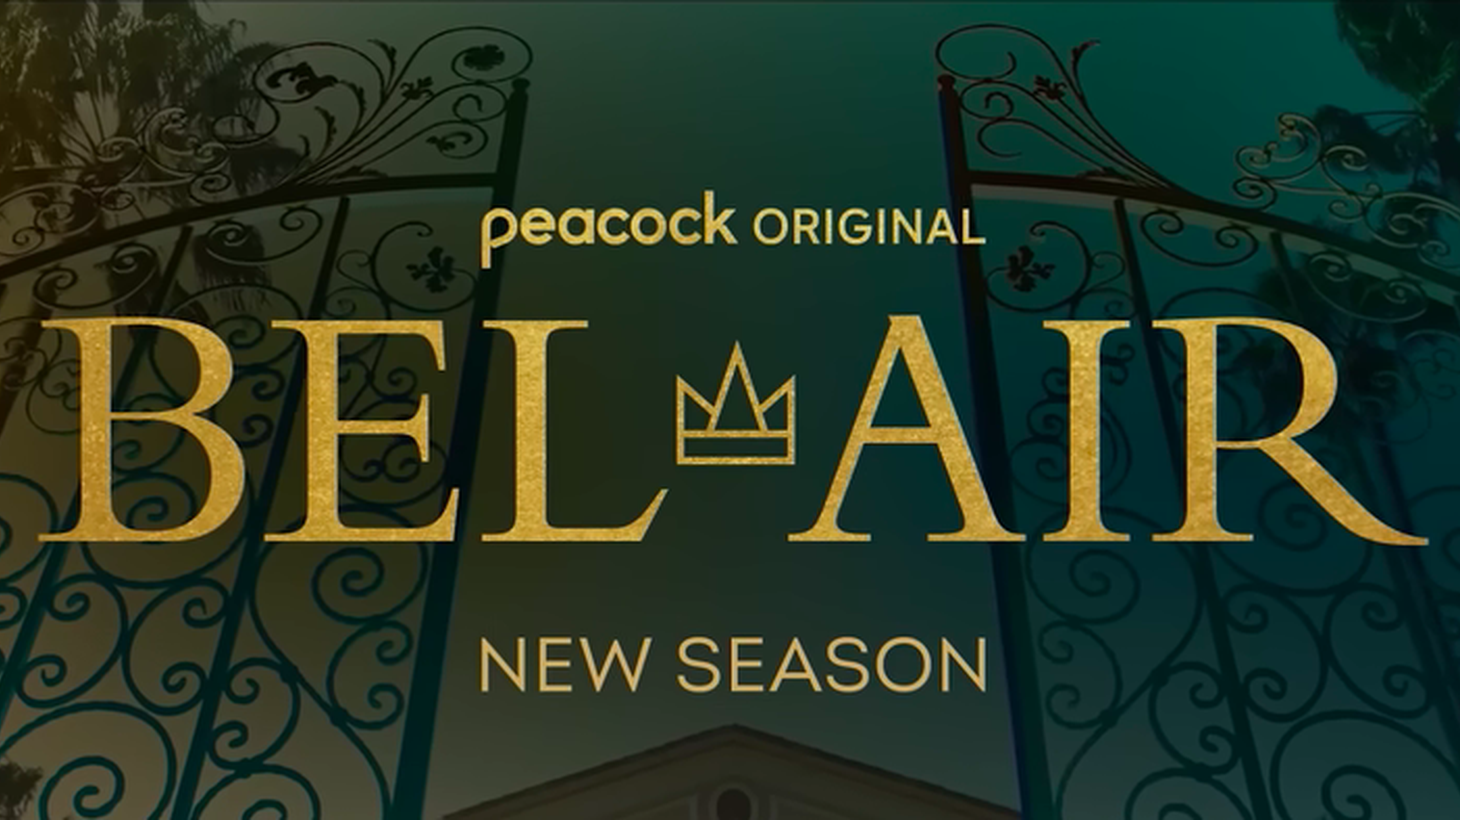 “Bel-Air” is a drama series set in present-day LA, following Will going from West Philadelphia to Bel Air.